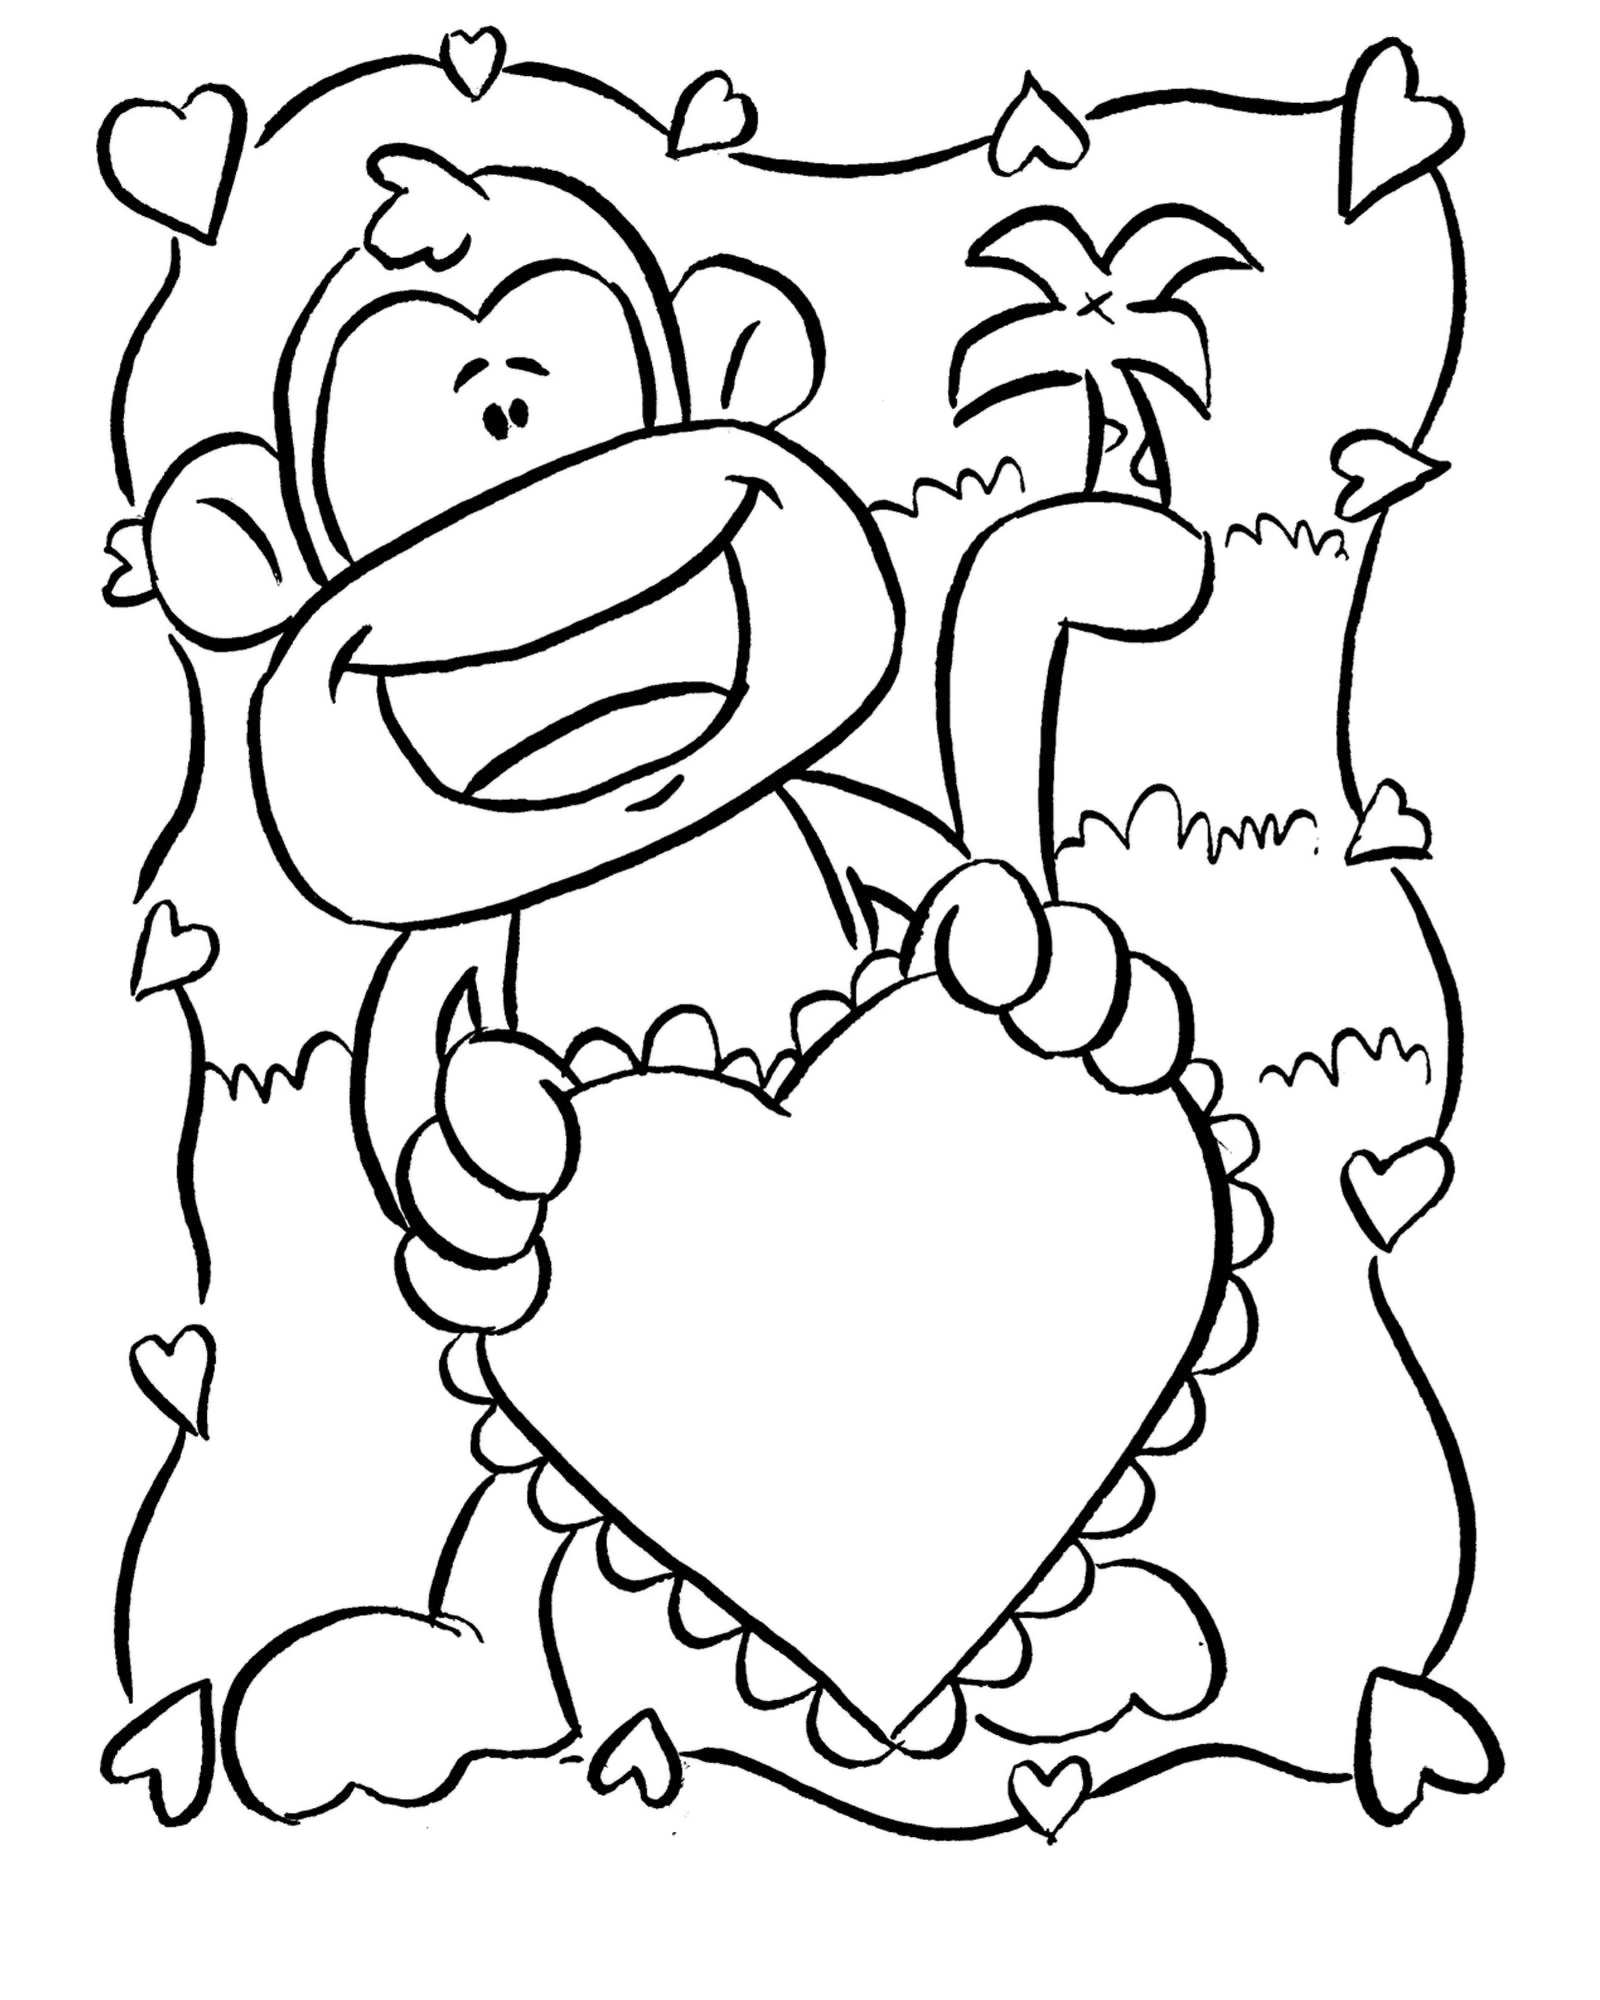 Coloring Pages dazzling monkey coloring pages : picture id ...